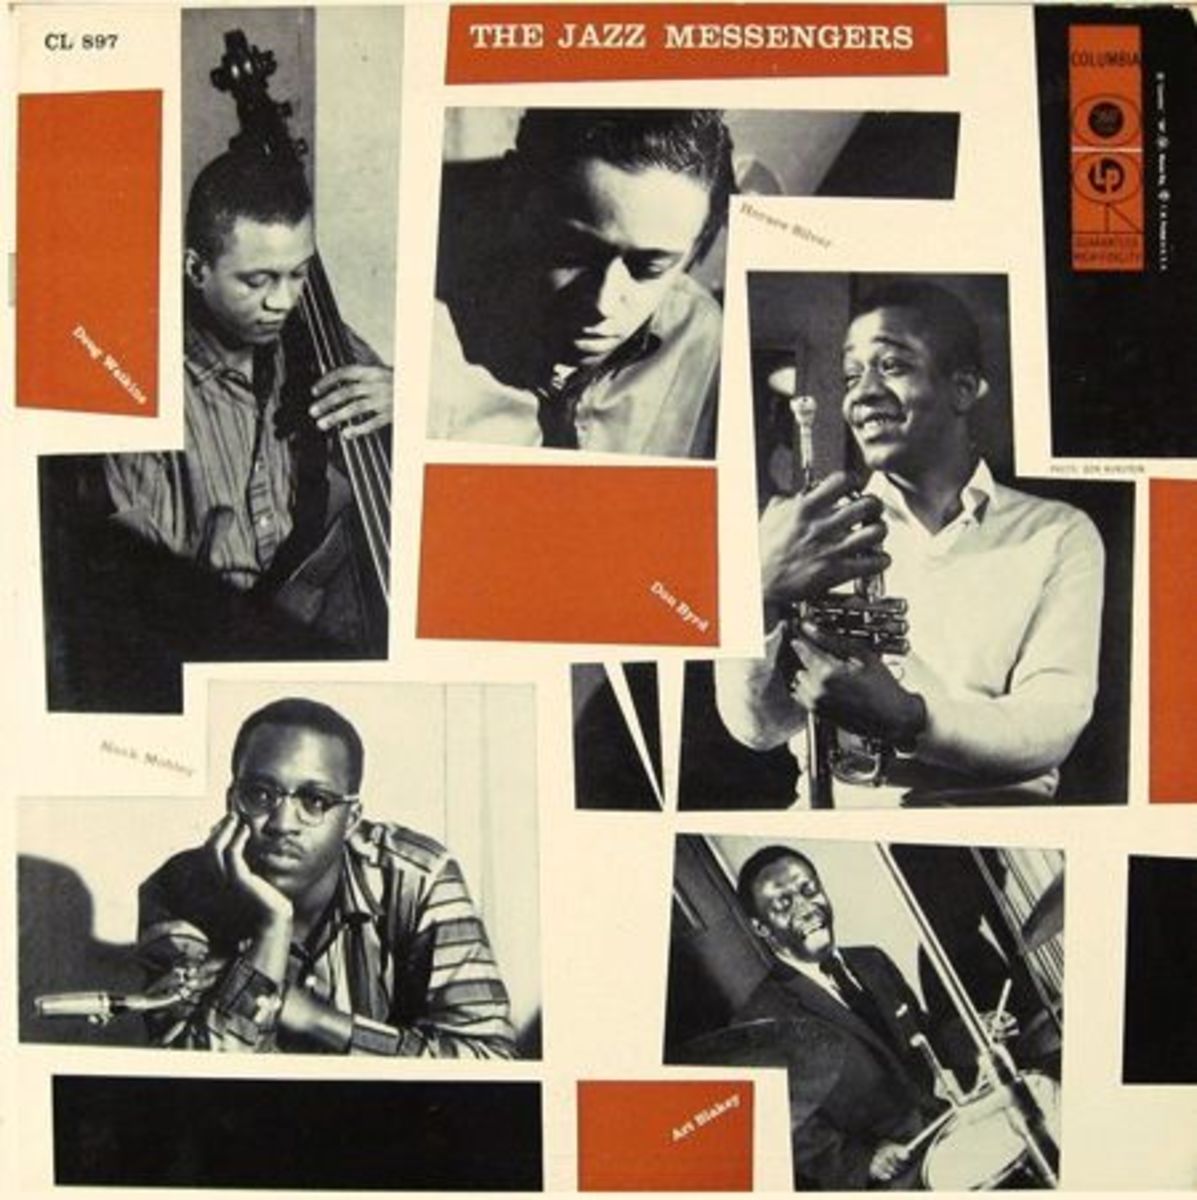 The Jazz Messengers Columbia Records CL 897 12" LP Vinyl Record, White Label Promo (1956) Album Cover Design by Neil Fujita Photos by Don Hunstein